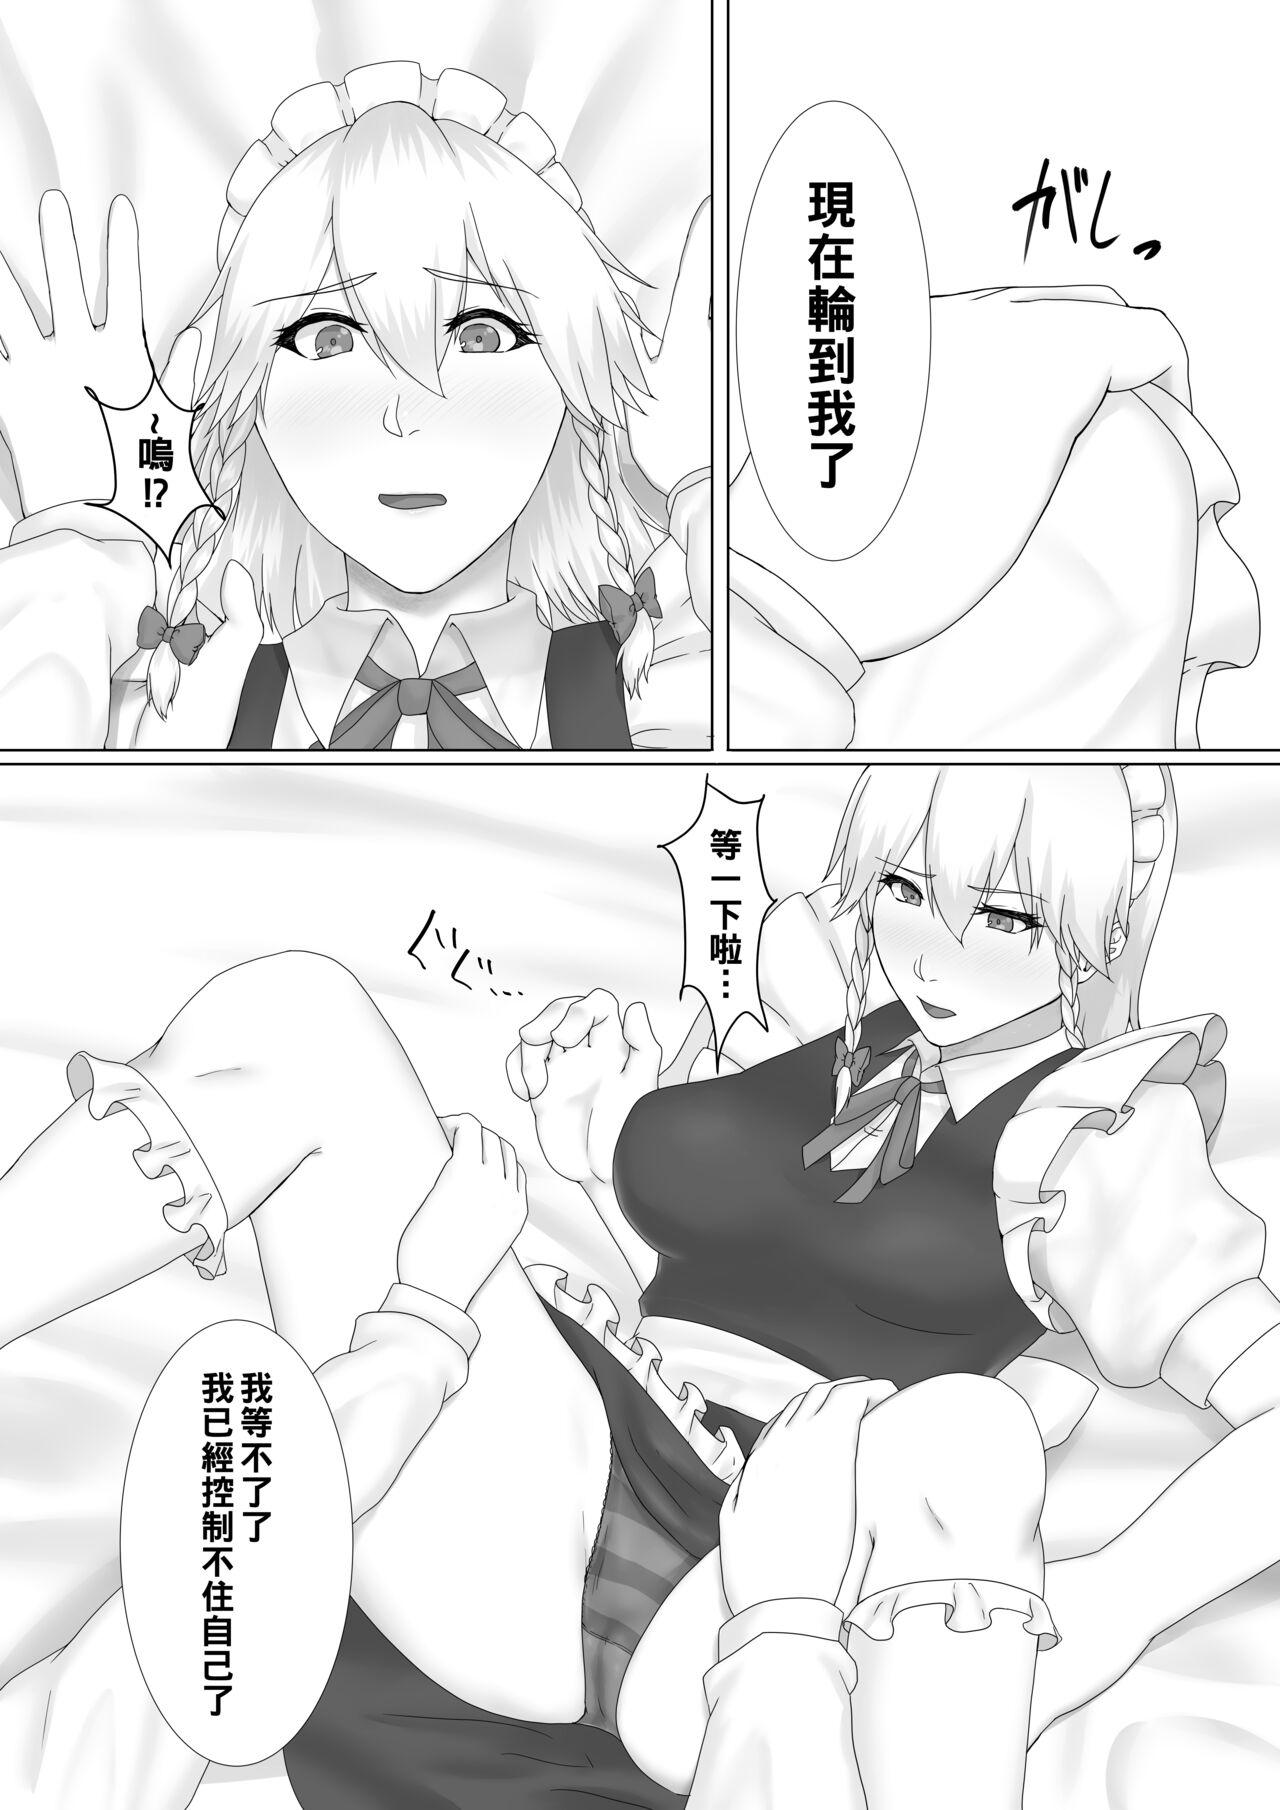 Spycam [糖質過多ぱると (只野めざし)] 咲夜さんとセフレになる本 (東方Project)（Chinese） - Touhou project Gay 3some - Page 7